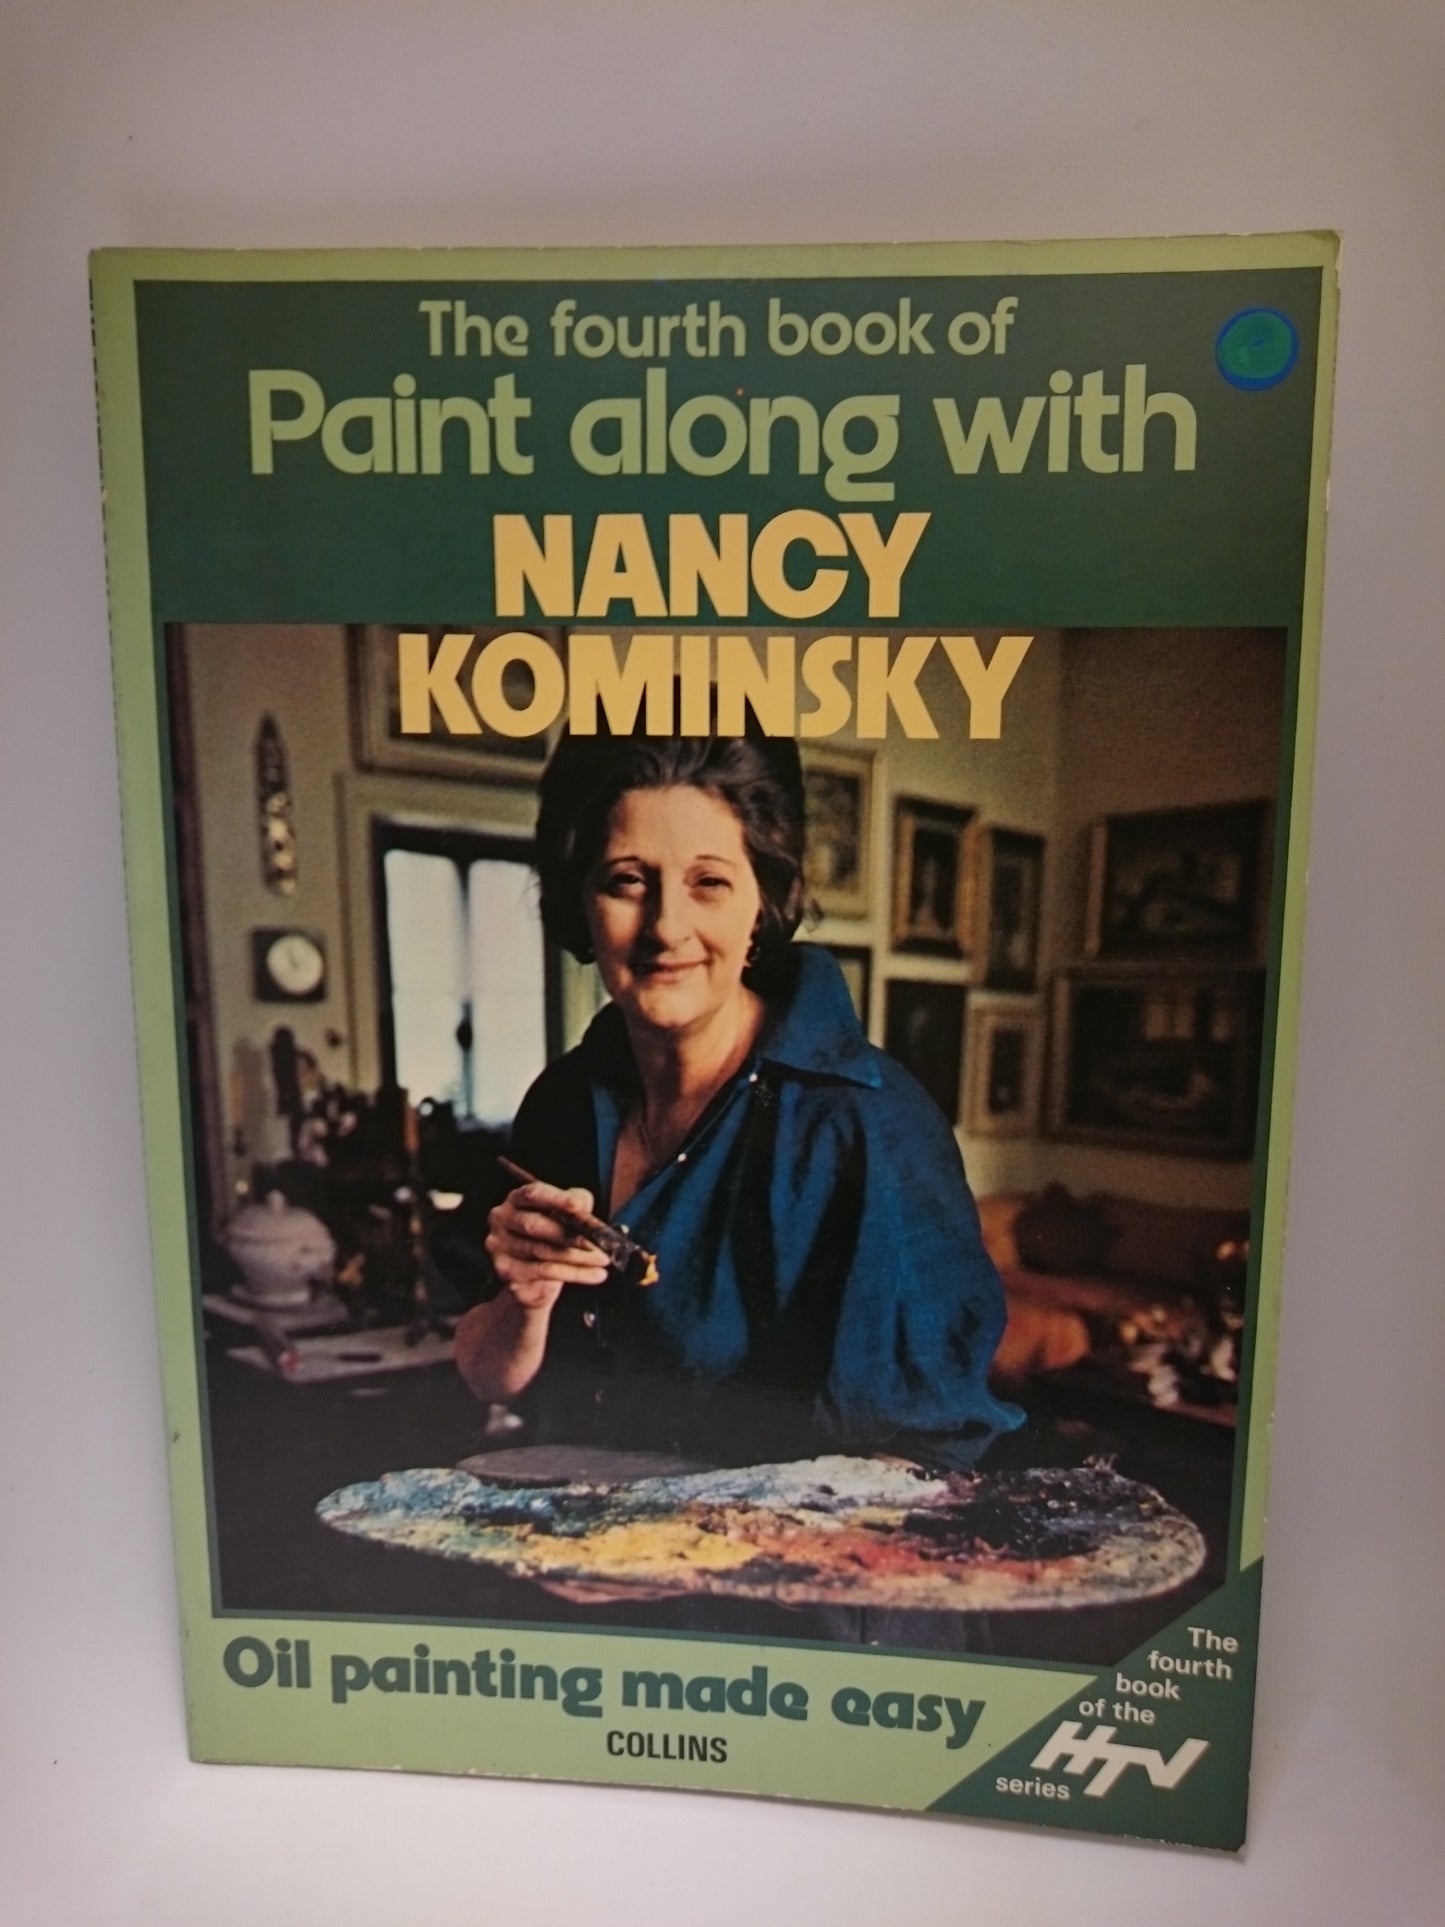 The fourth book of paint along with Nancy Kominsky